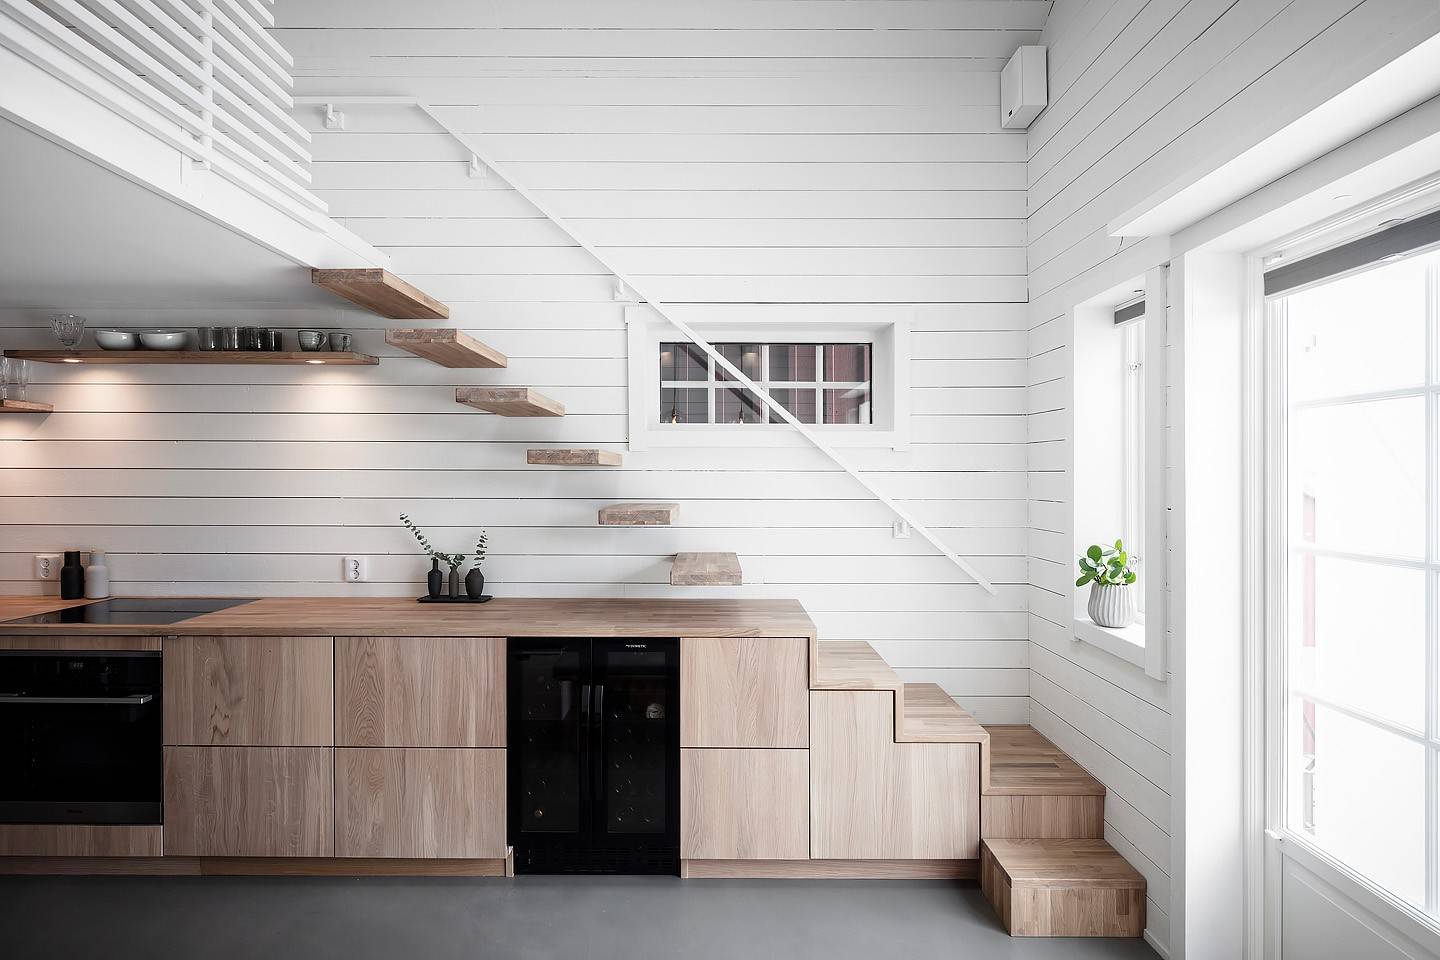 Under the stairs space turned into a kitchen (from Houzz)